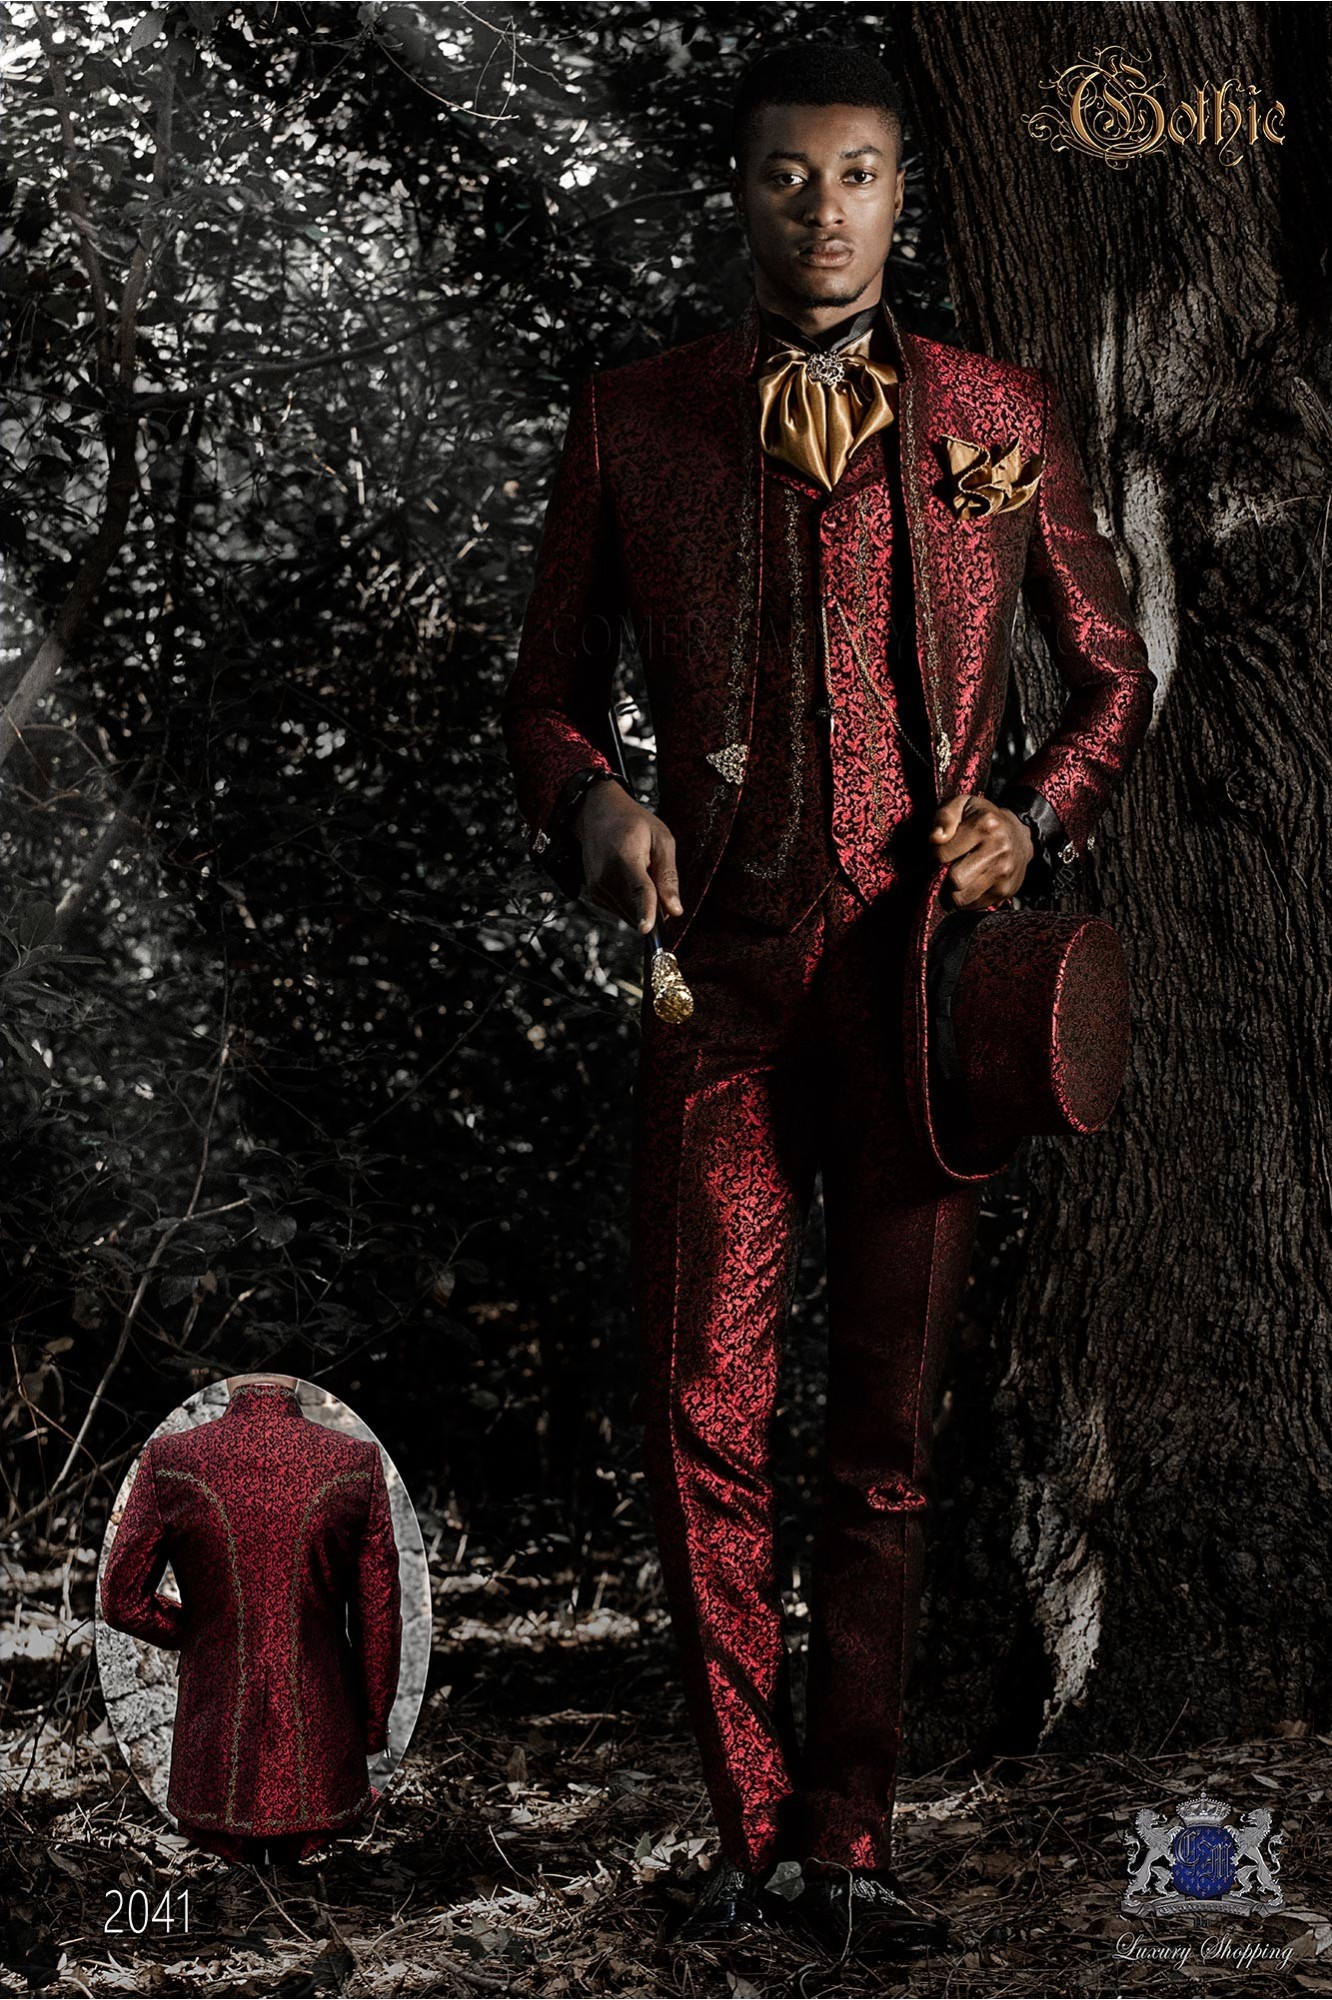 intage mao collar frock coat in red jacquard fabric with golden embroidery and crystal clasp model 2041 Mario Moyano